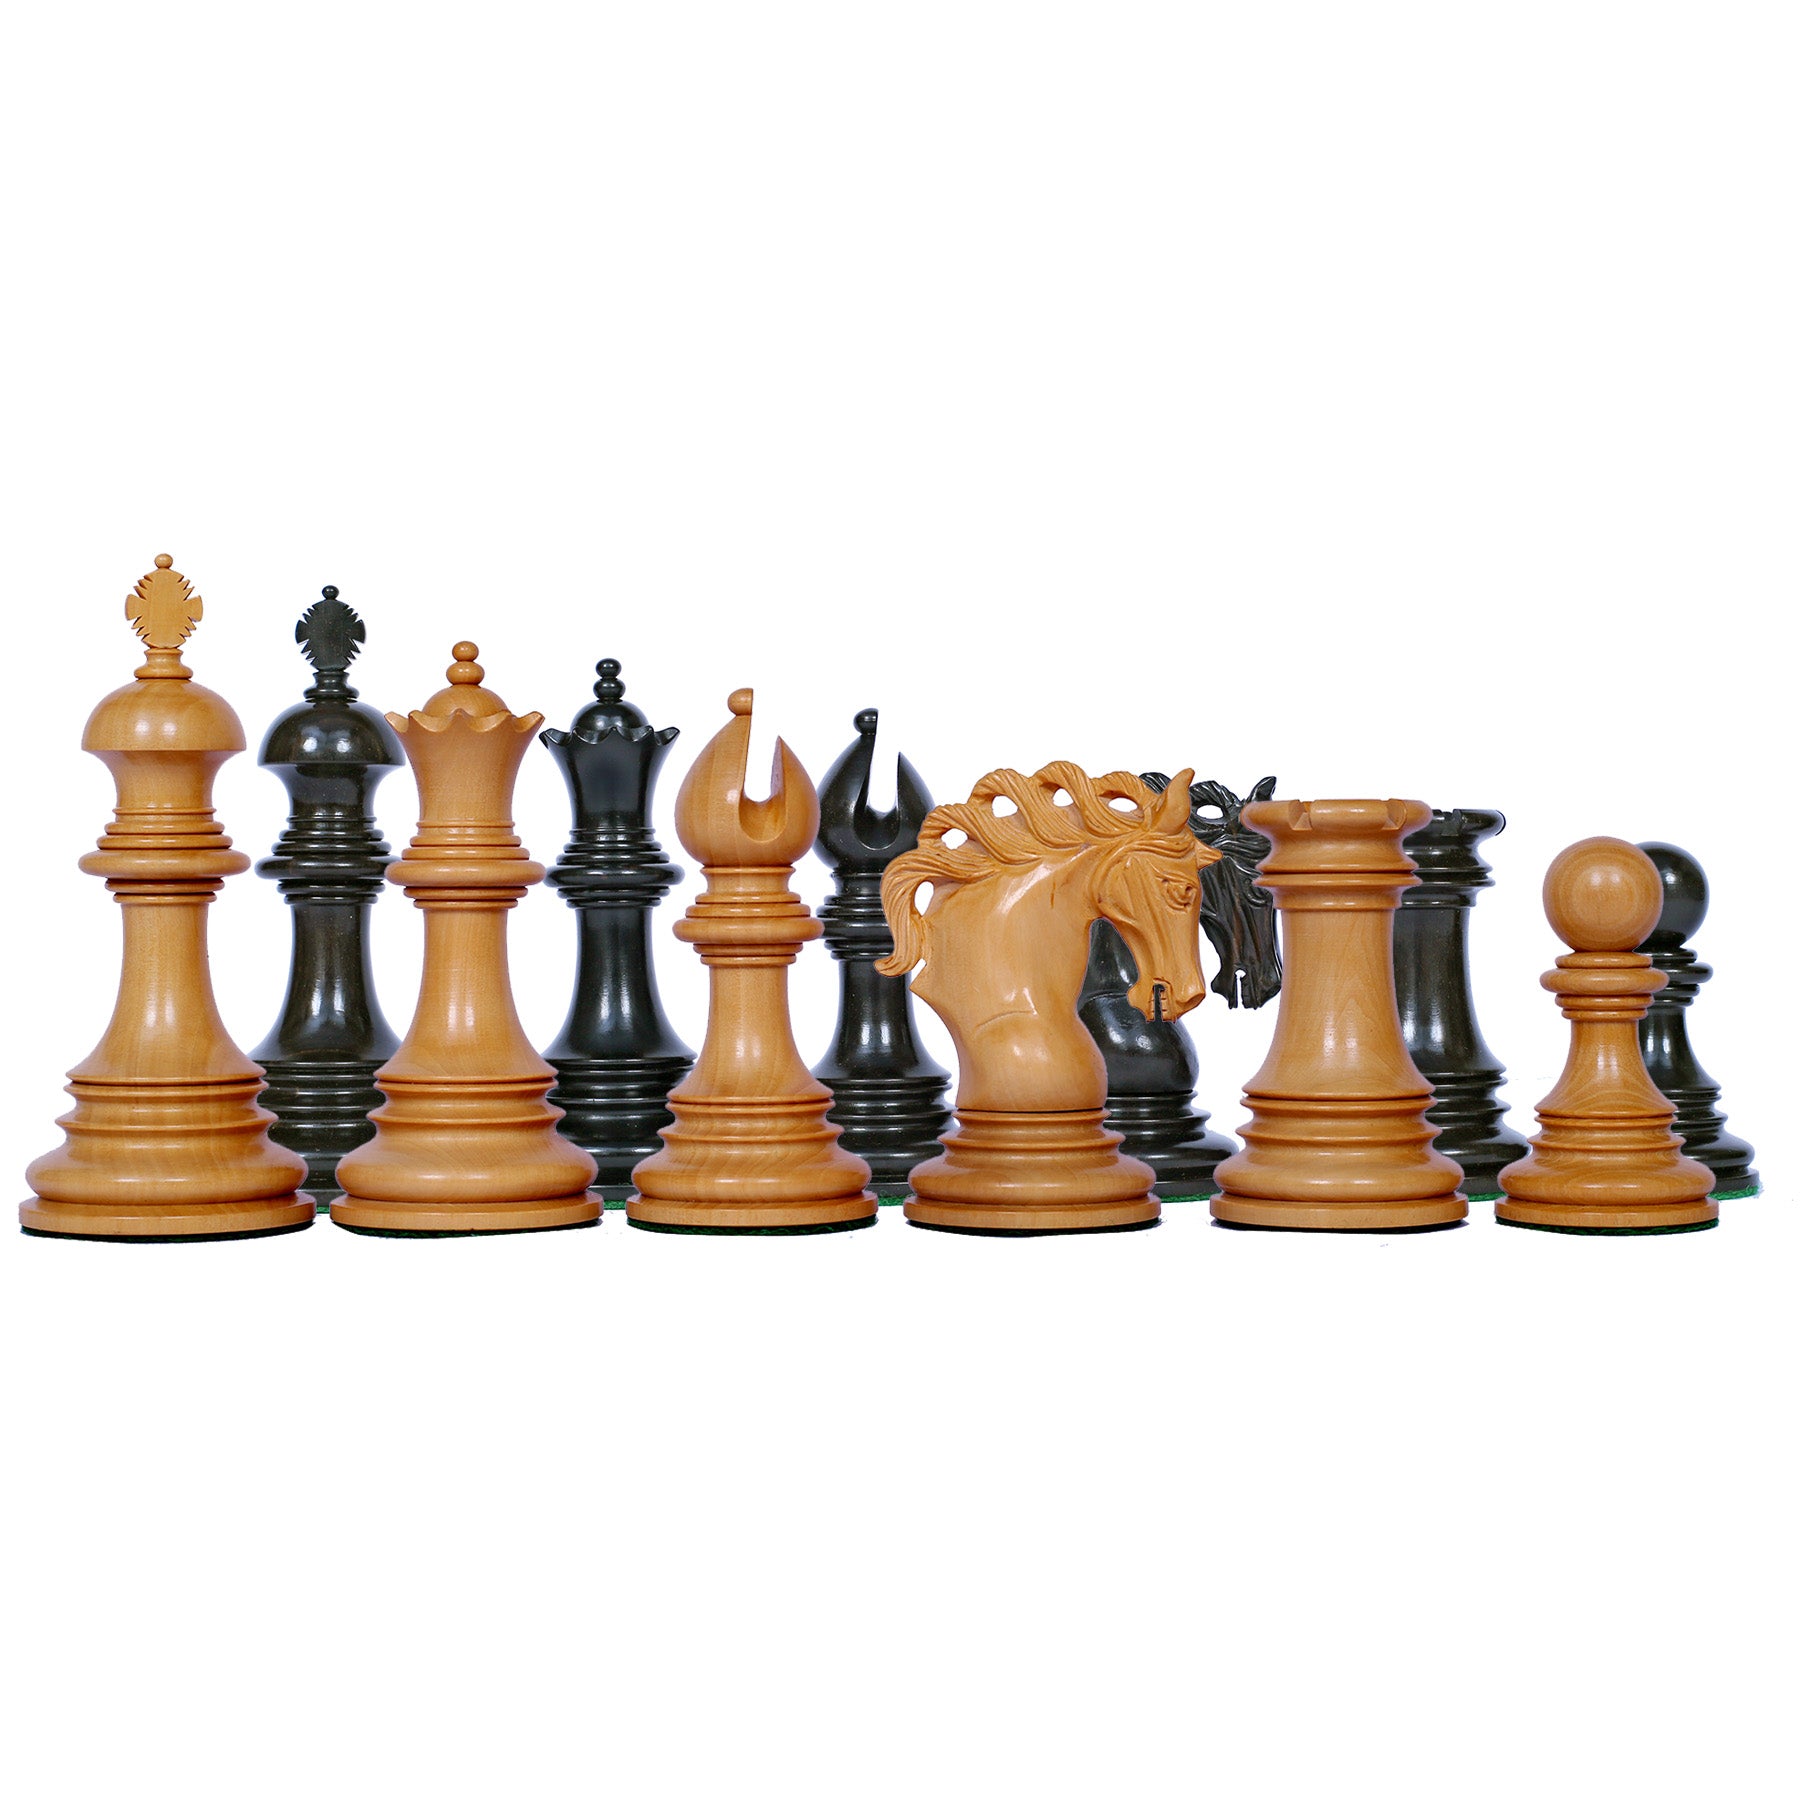 Westminster Series 4.4 Luxury Chess set in Ebony and Box Wood